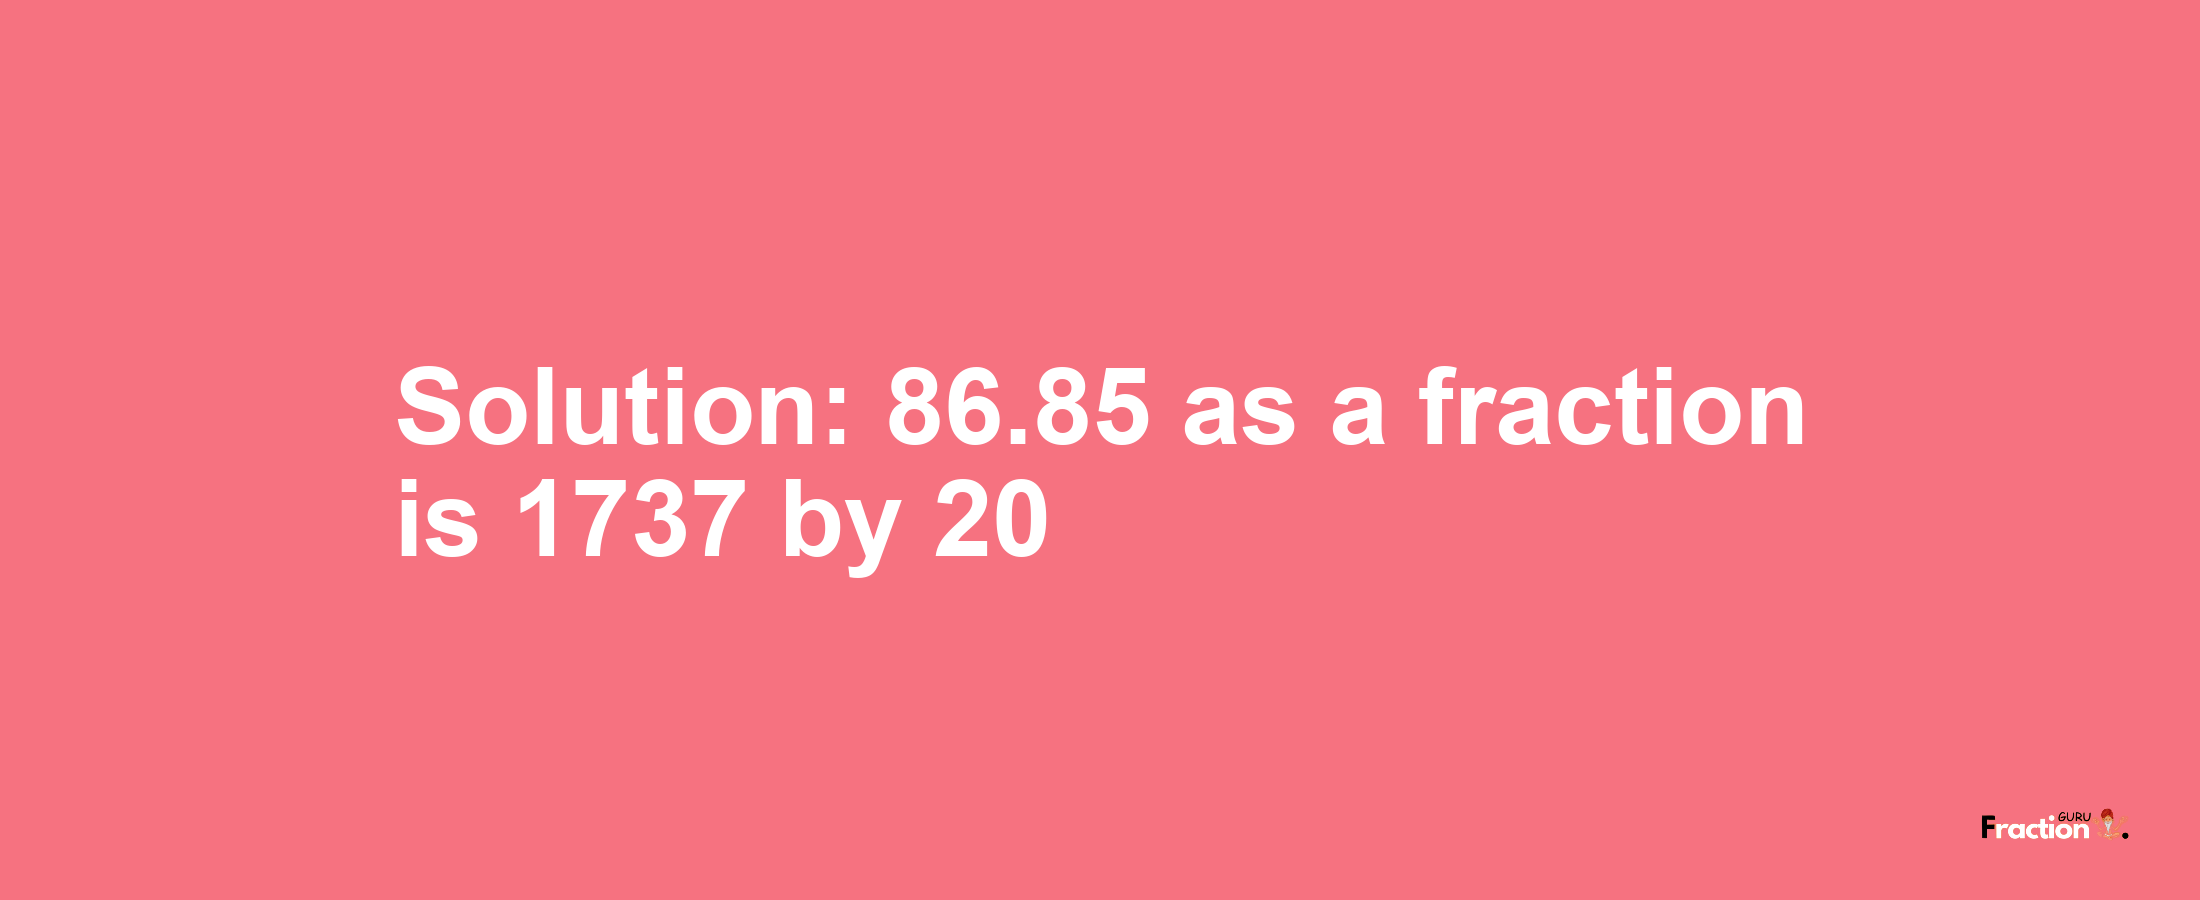 Solution:86.85 as a fraction is 1737/20